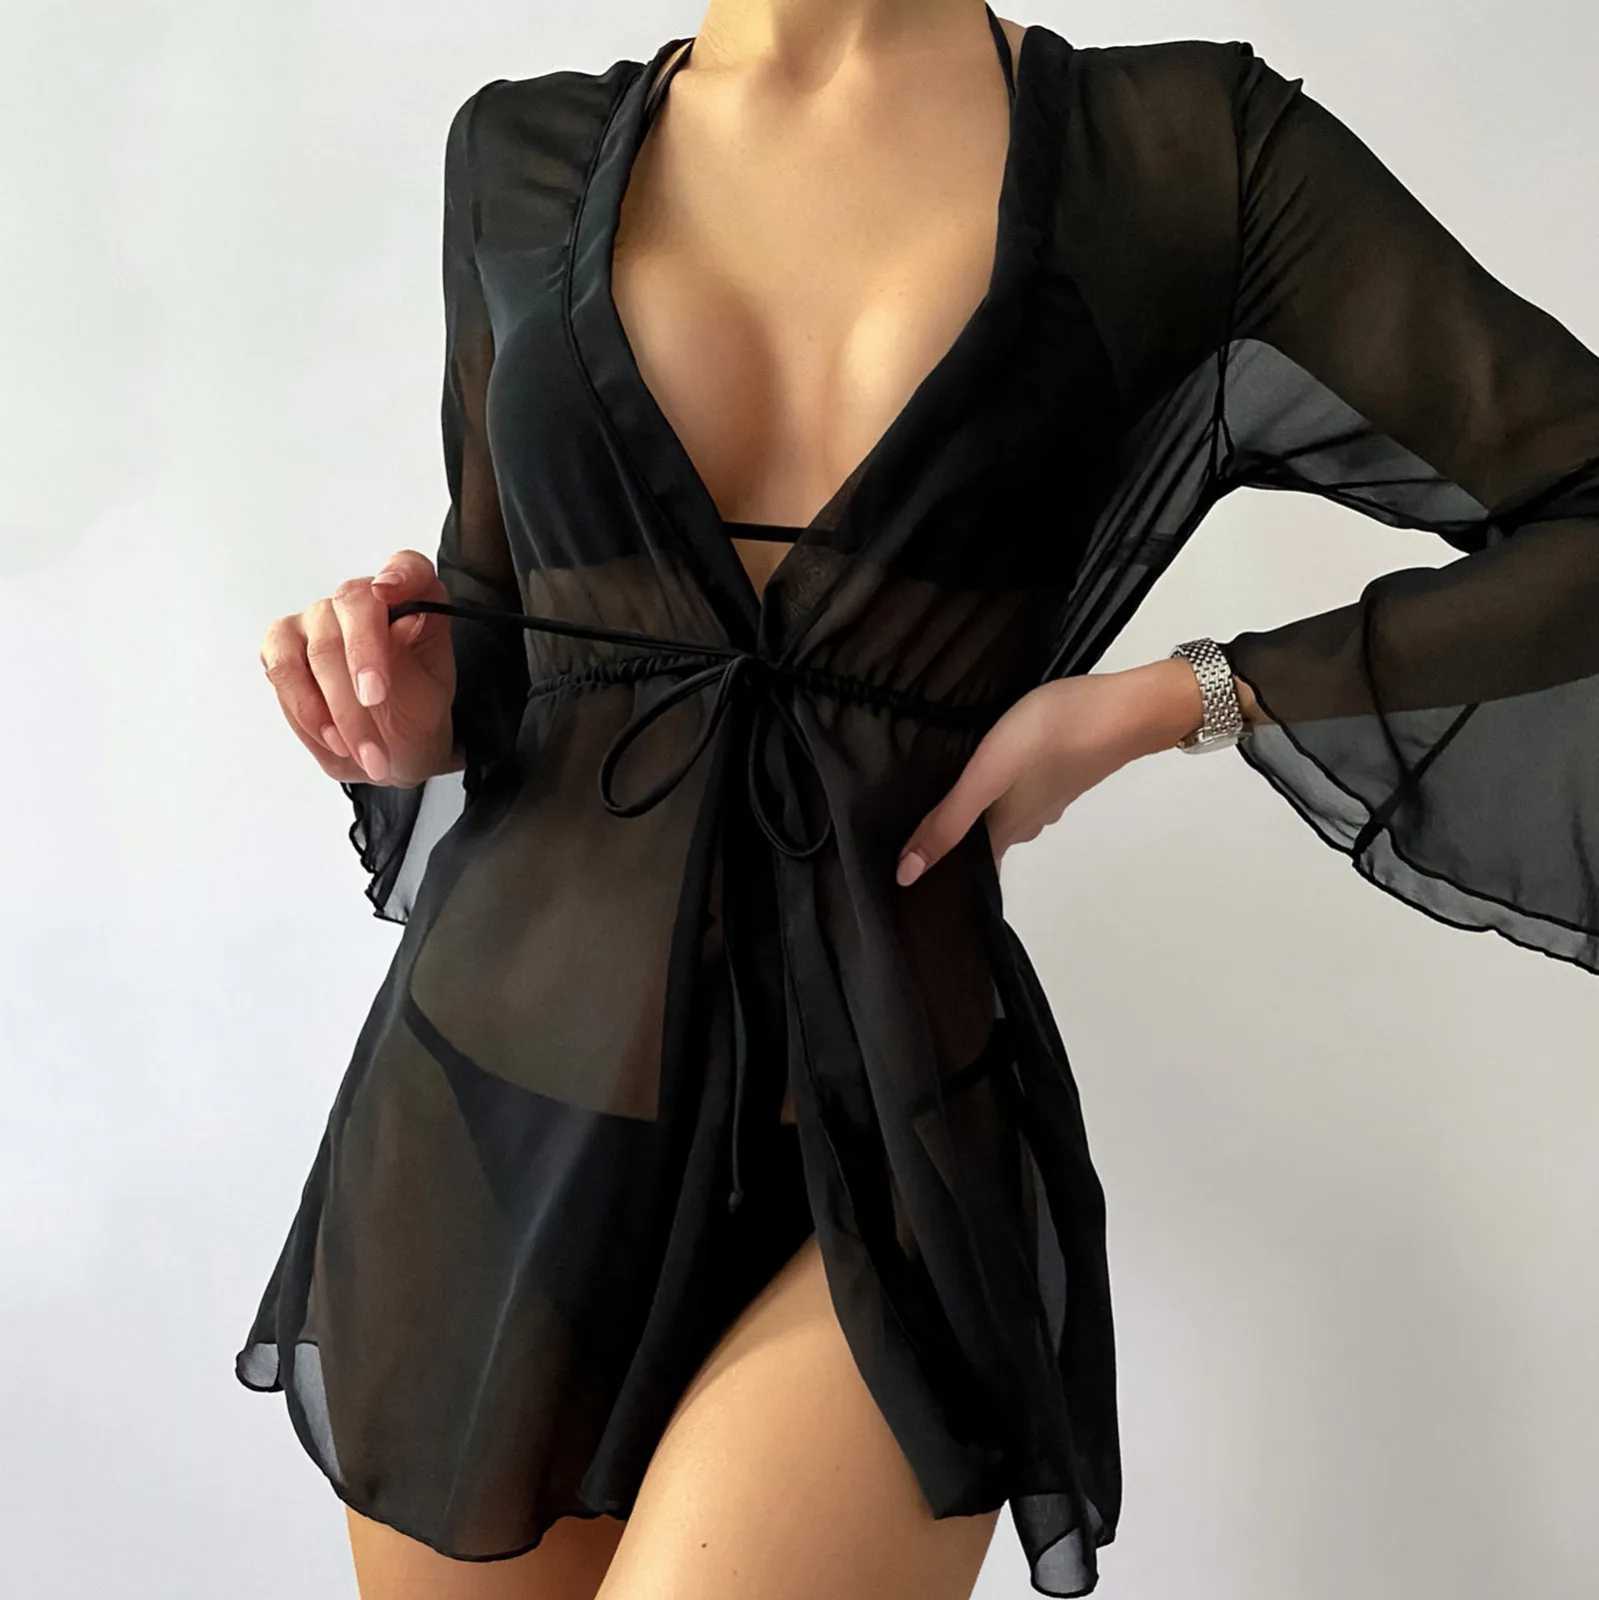 

2022 New Women Sheer Mesh Cover Up Shorts Beach Cover Up Beach Wrap Bikini Wraps Solid Pom Sheer Lace Up Cover Up